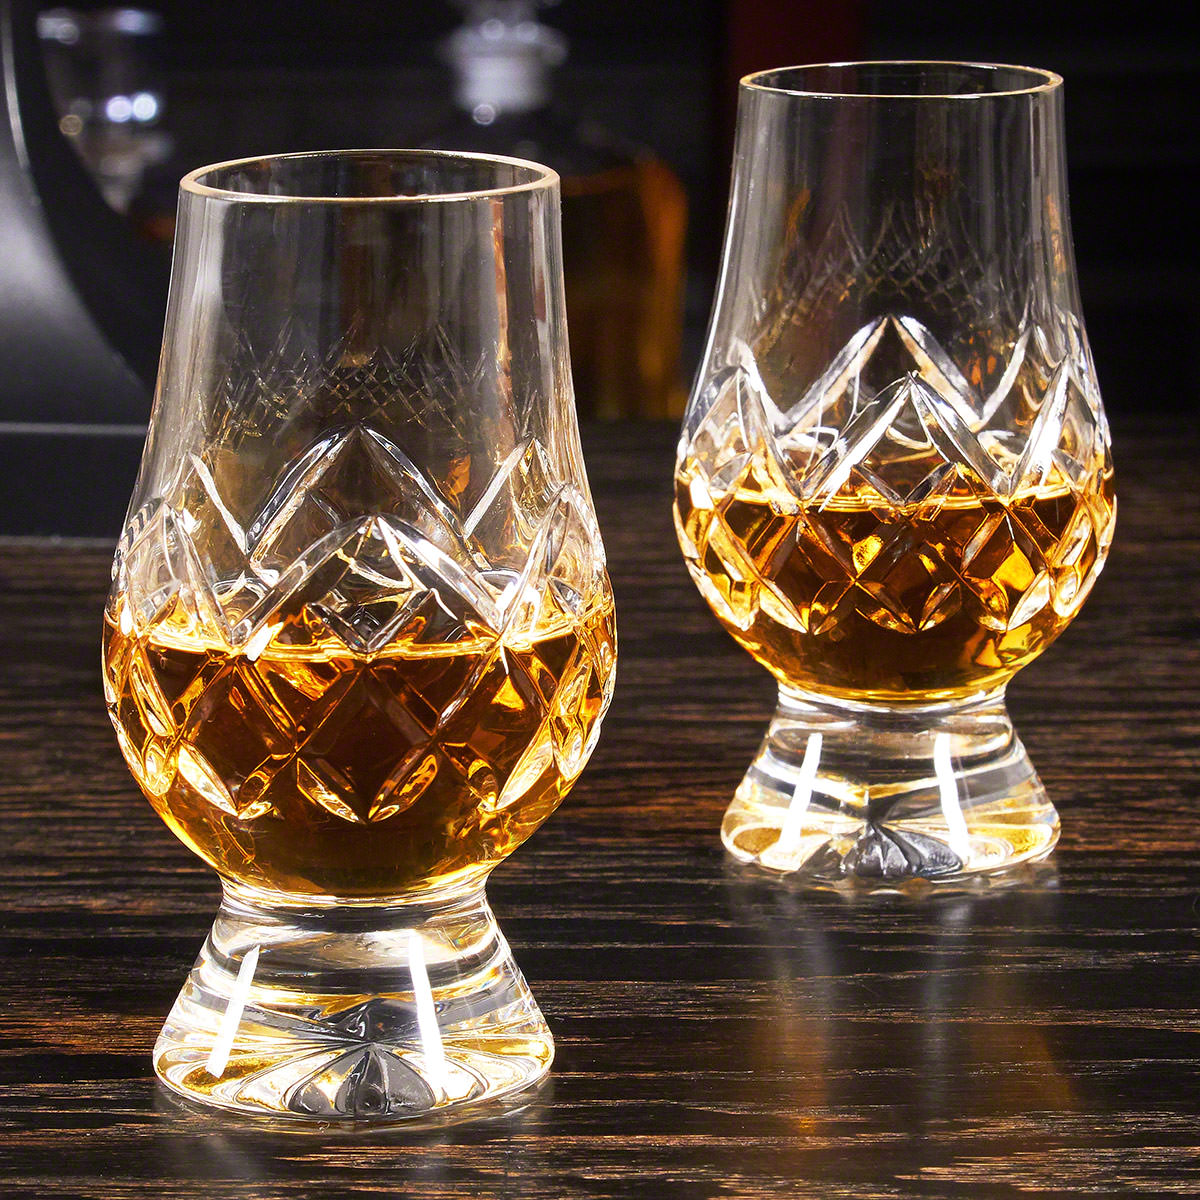 The Glencairn Official Cut Crystal Whisky Glass Presentation Box Set of 2 